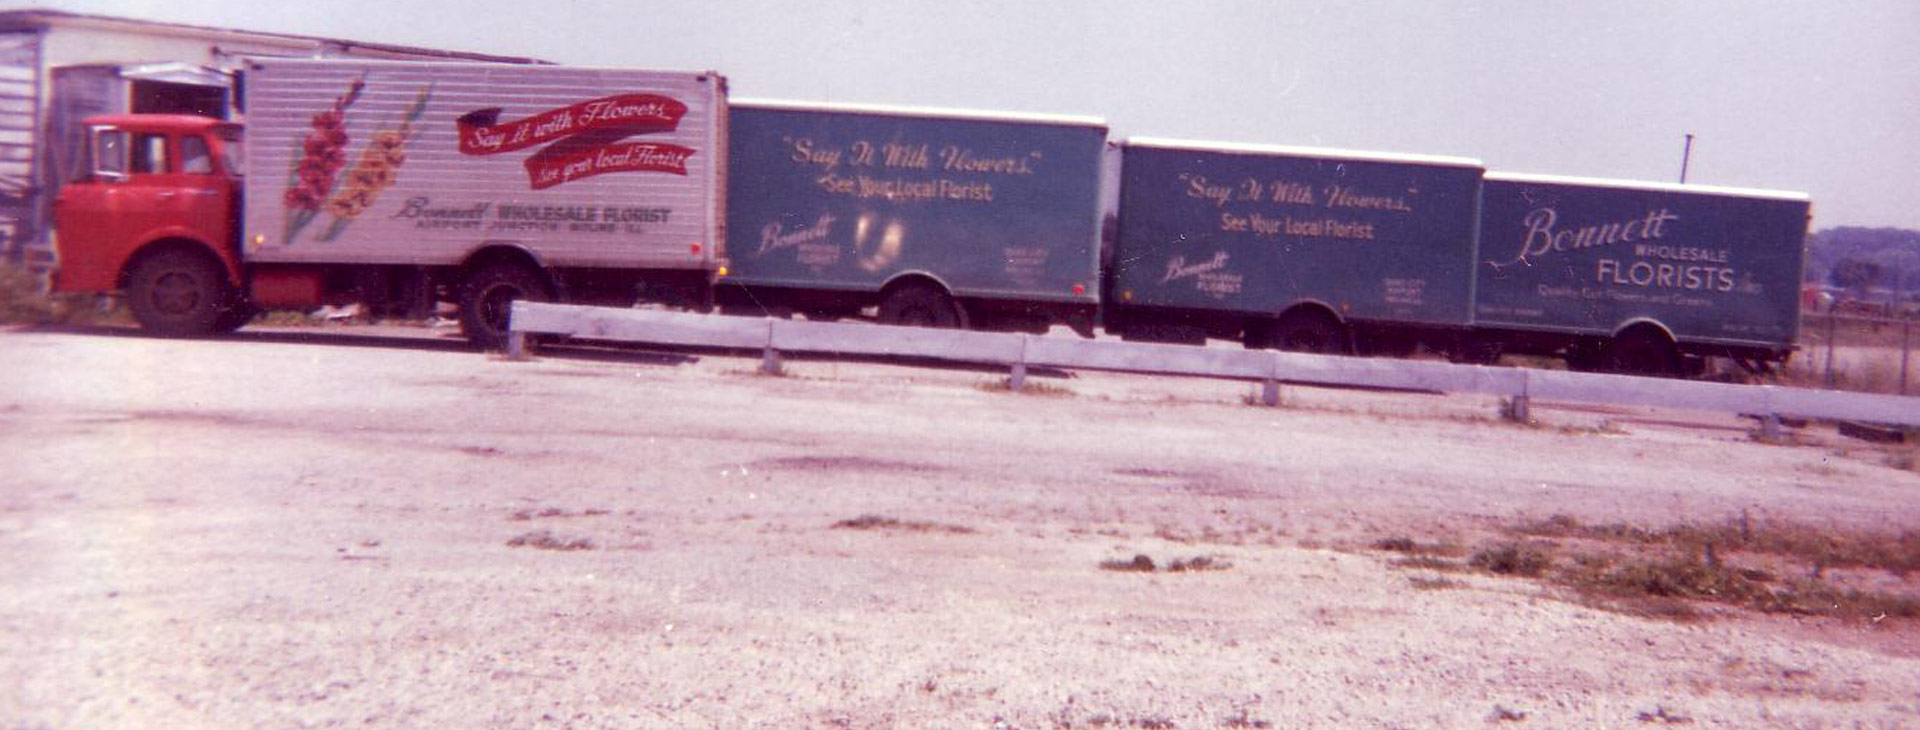 Row of delivery trucks with Bonnett Wholesale Florists branding